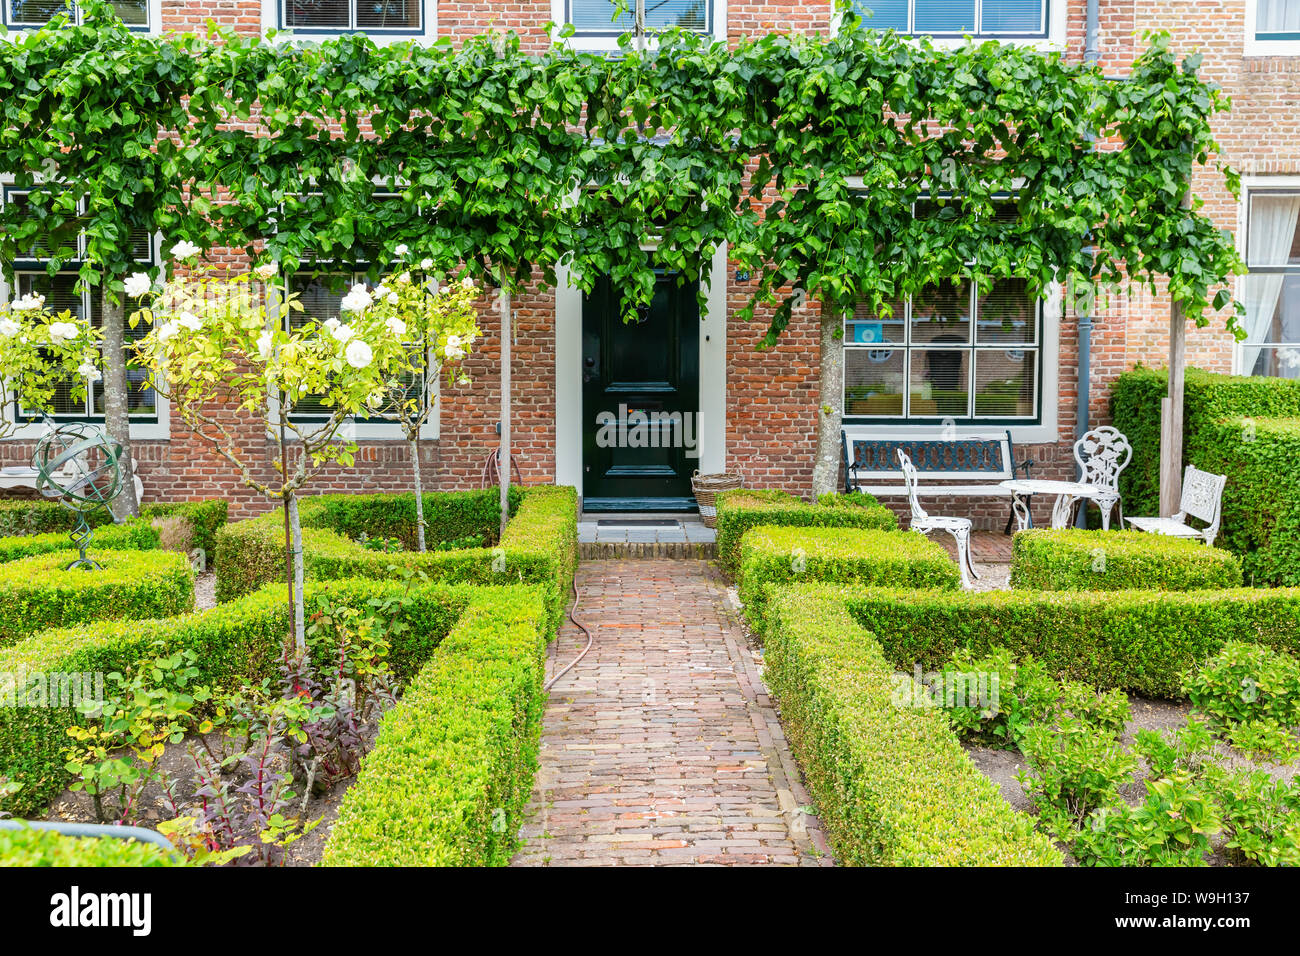 Veere, Netherlands - June 09, 2019: frontyard in Veere. Veere is famous for its picturesque old town and a popular destination for day tripper Stock Photo